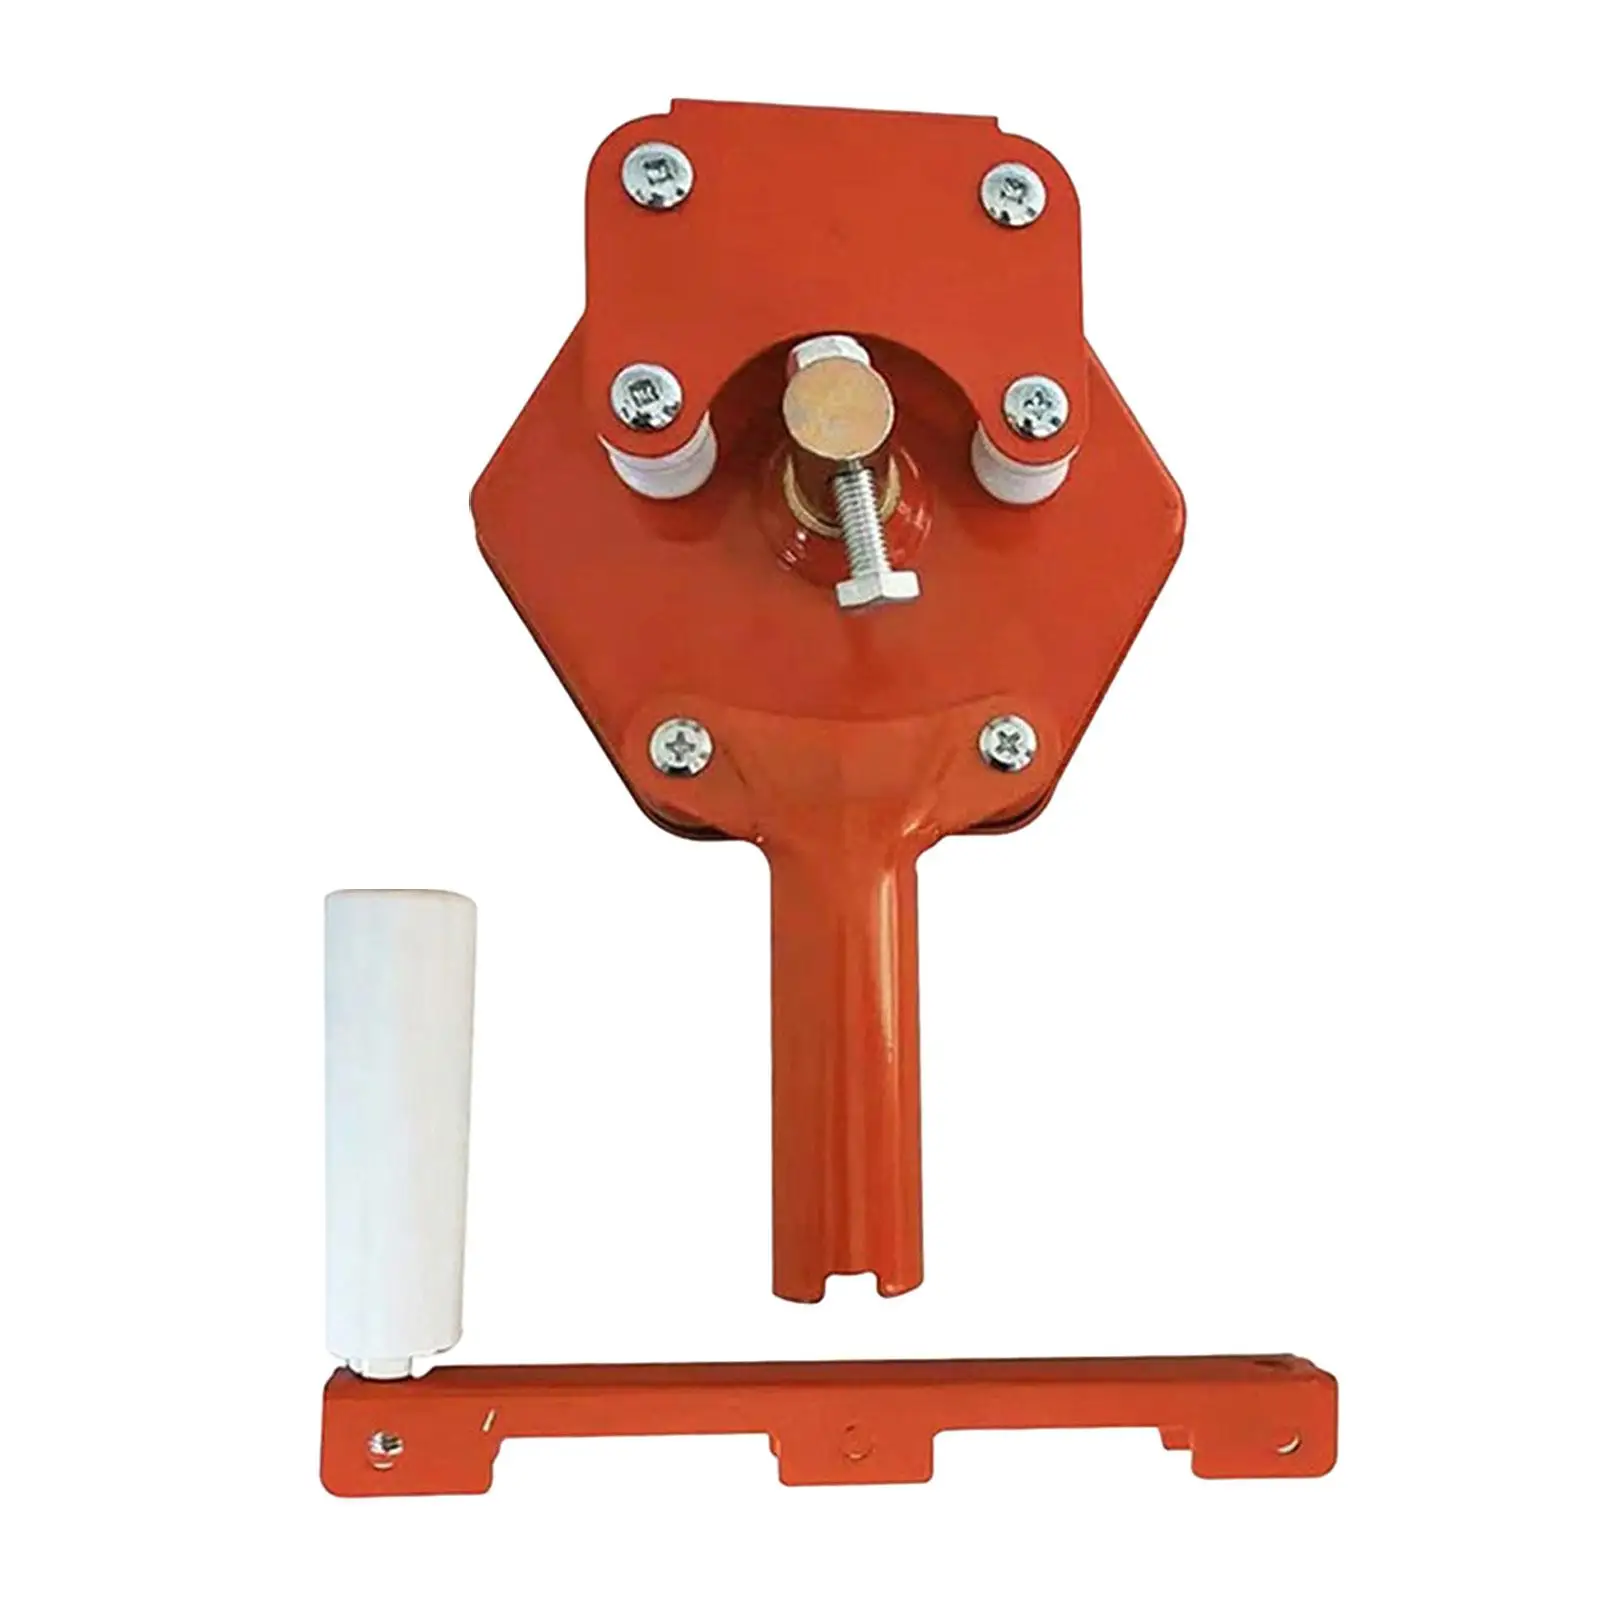 Greenhouse Hand Crank Winch Roll up Lifting Device for Breeding Greenhouses Flower Greenhouses Agricultural Planting Vegetables